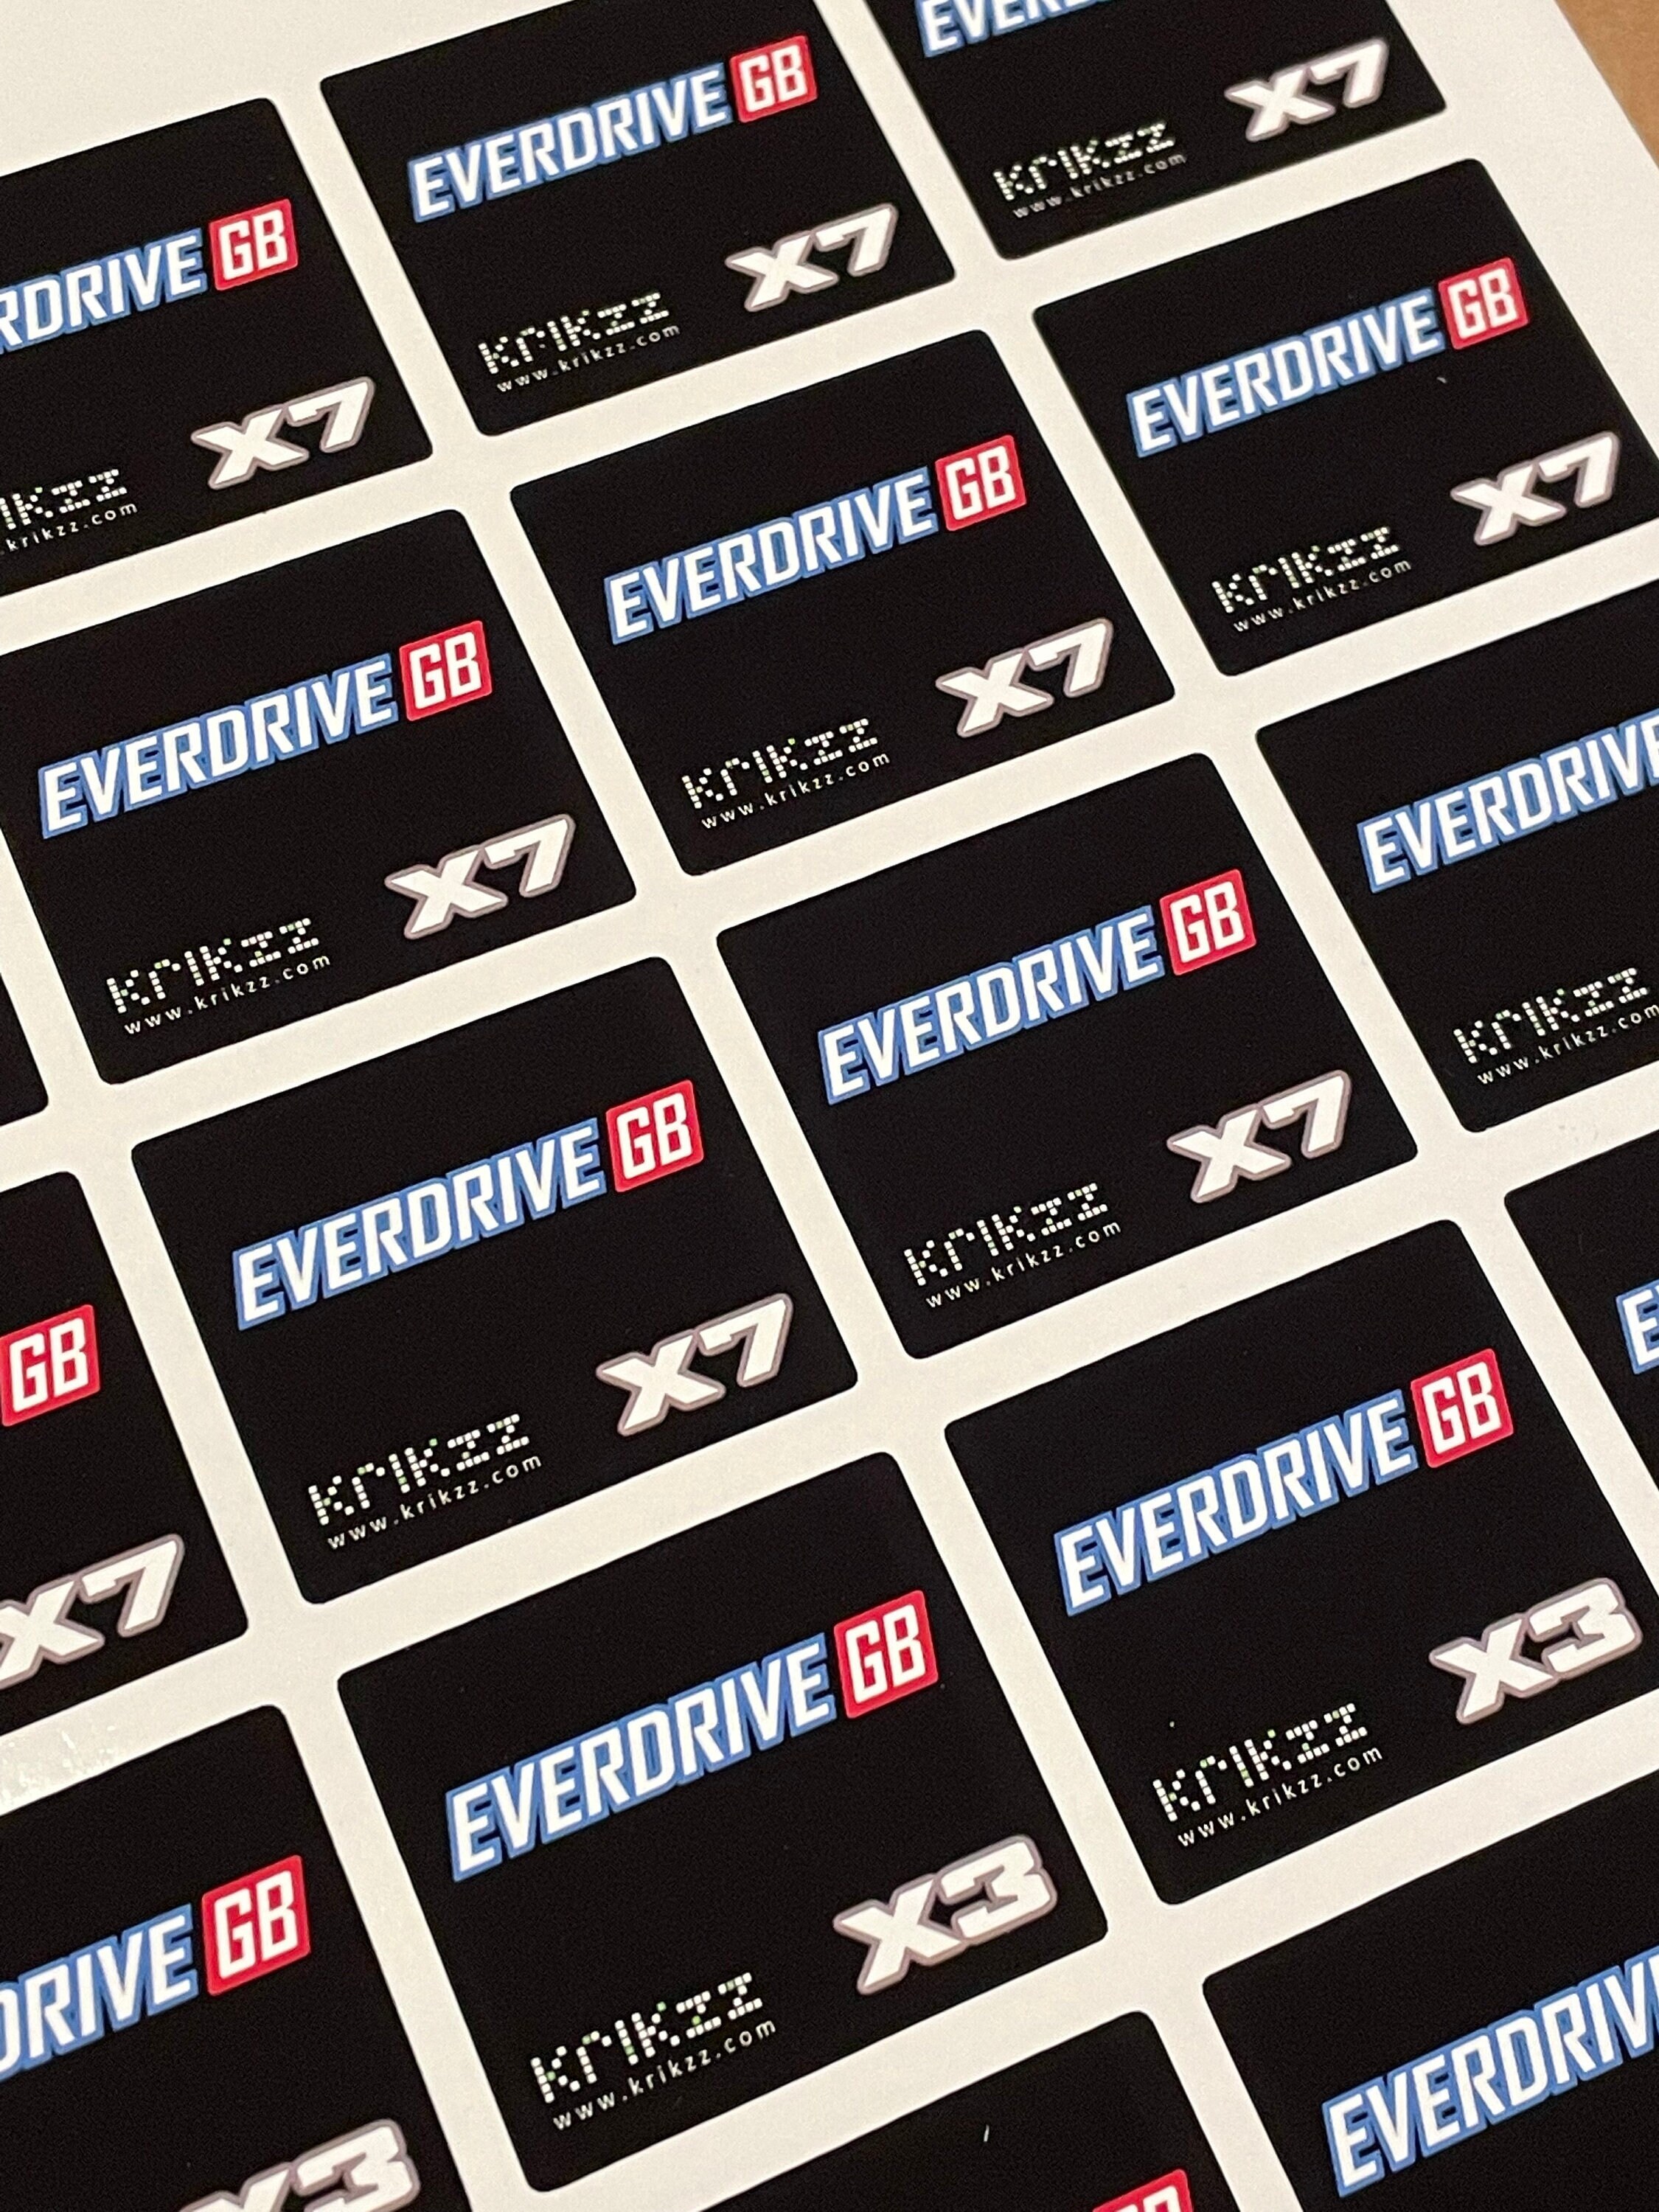 Everdrive GB X7 & Gameboy Replacement Stickers / Labels